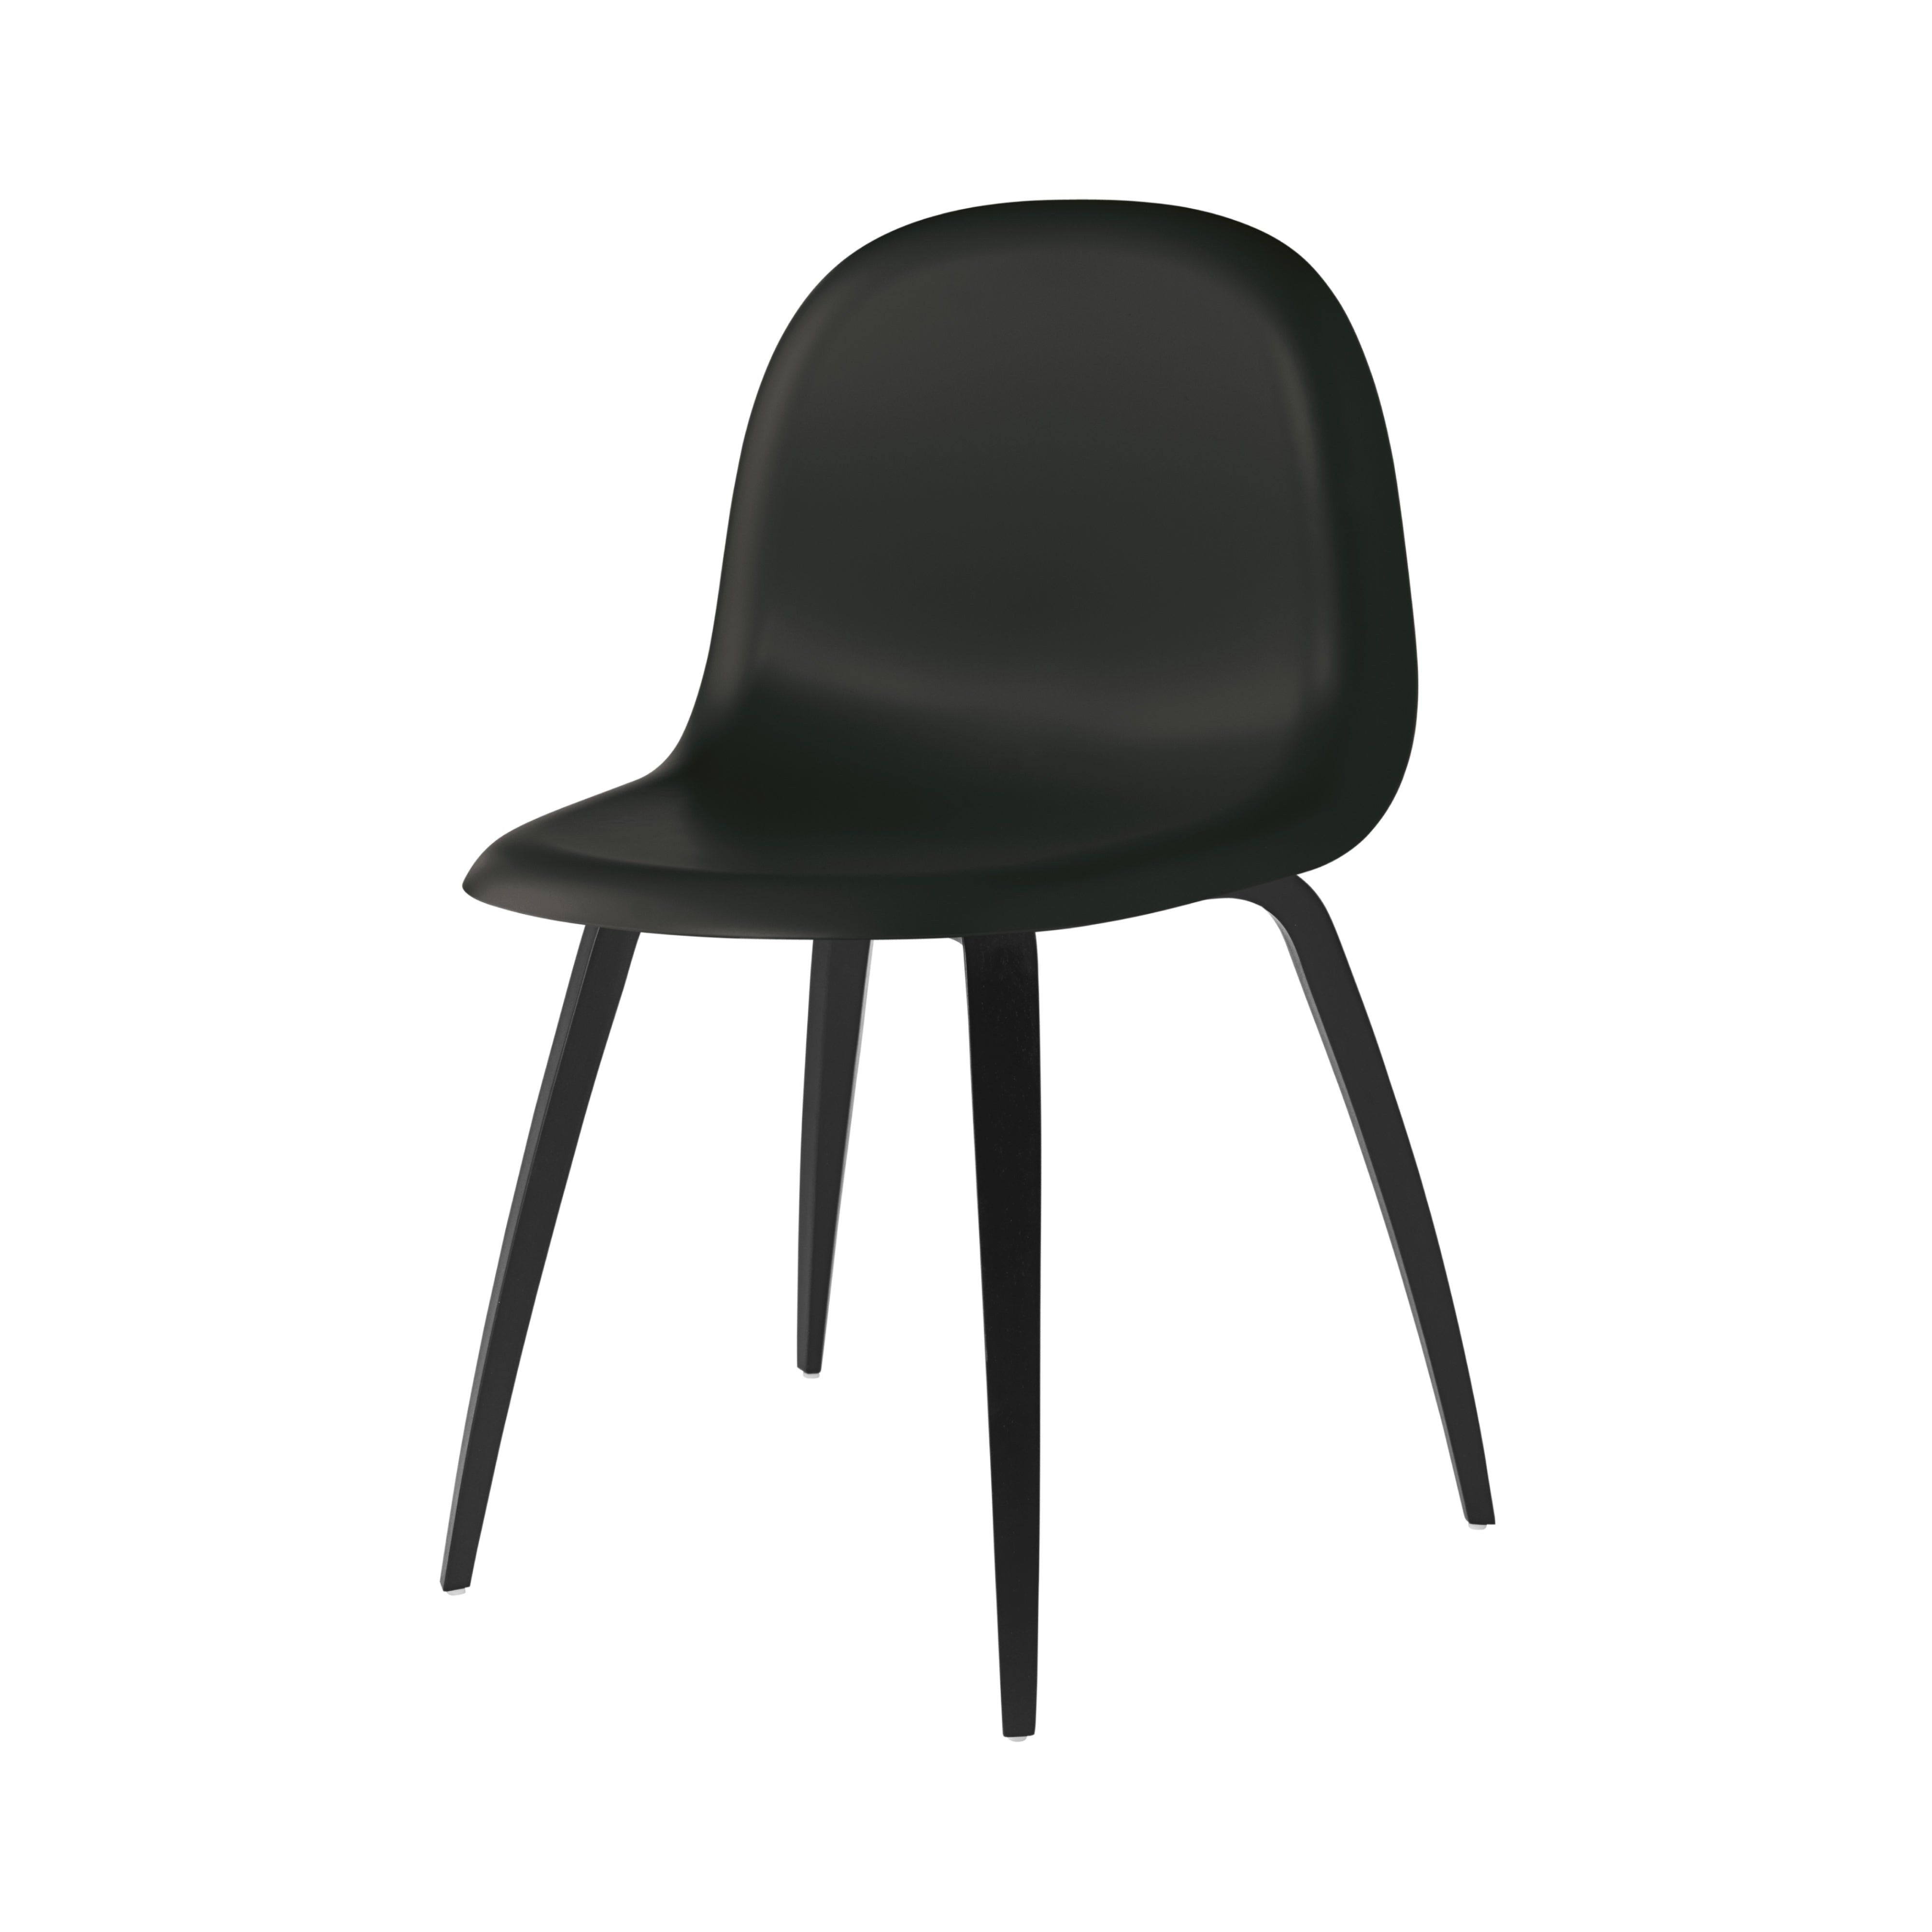 3D Dining Chair: Wood Base + Plastic Shell + Black Stained Beech + Plastic Glides